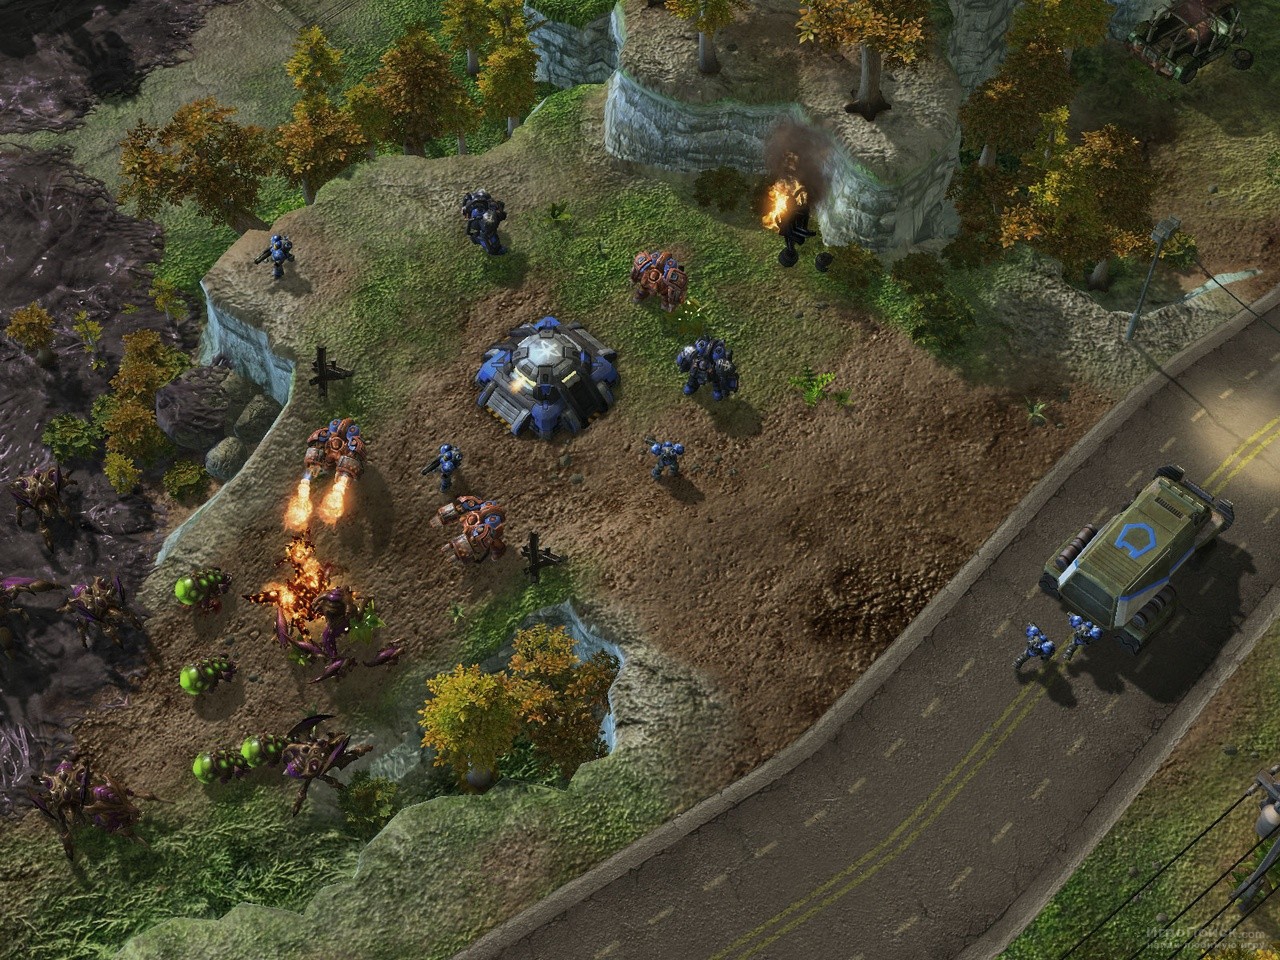    StarCraft II: Legacy Of The Void